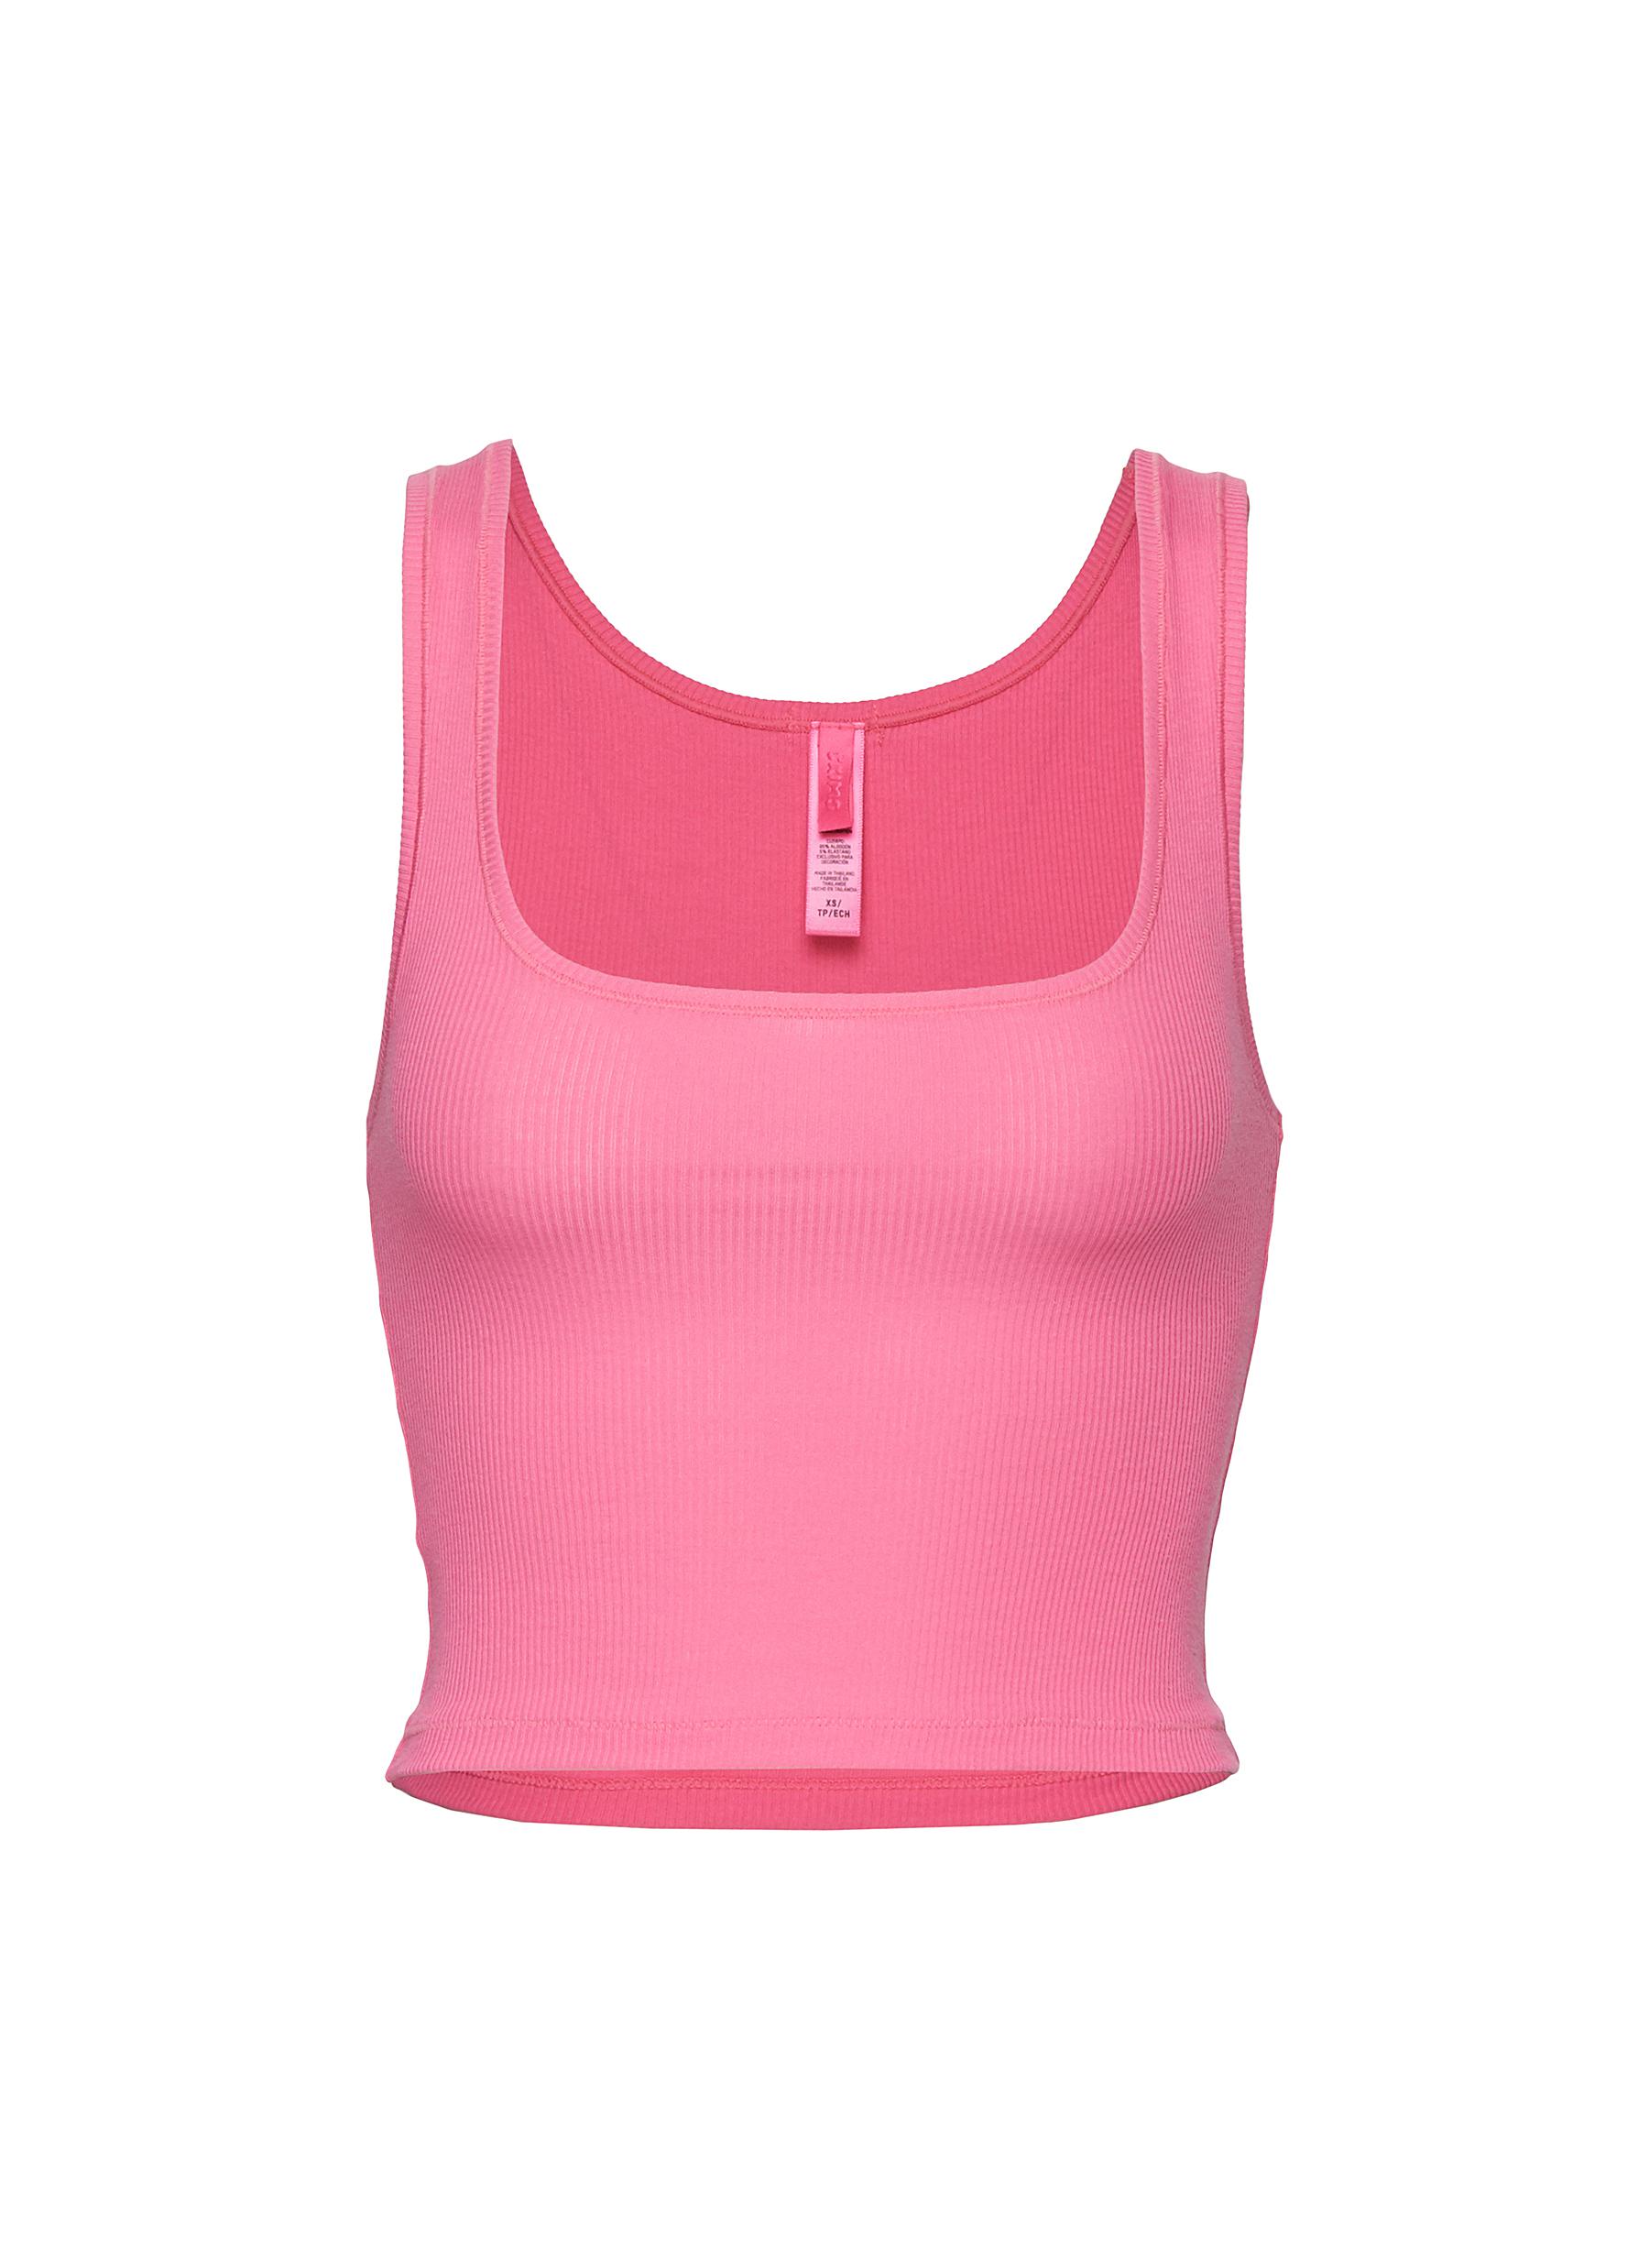 Women's Tank Top Solid Hot Pink Color 100% Cotton